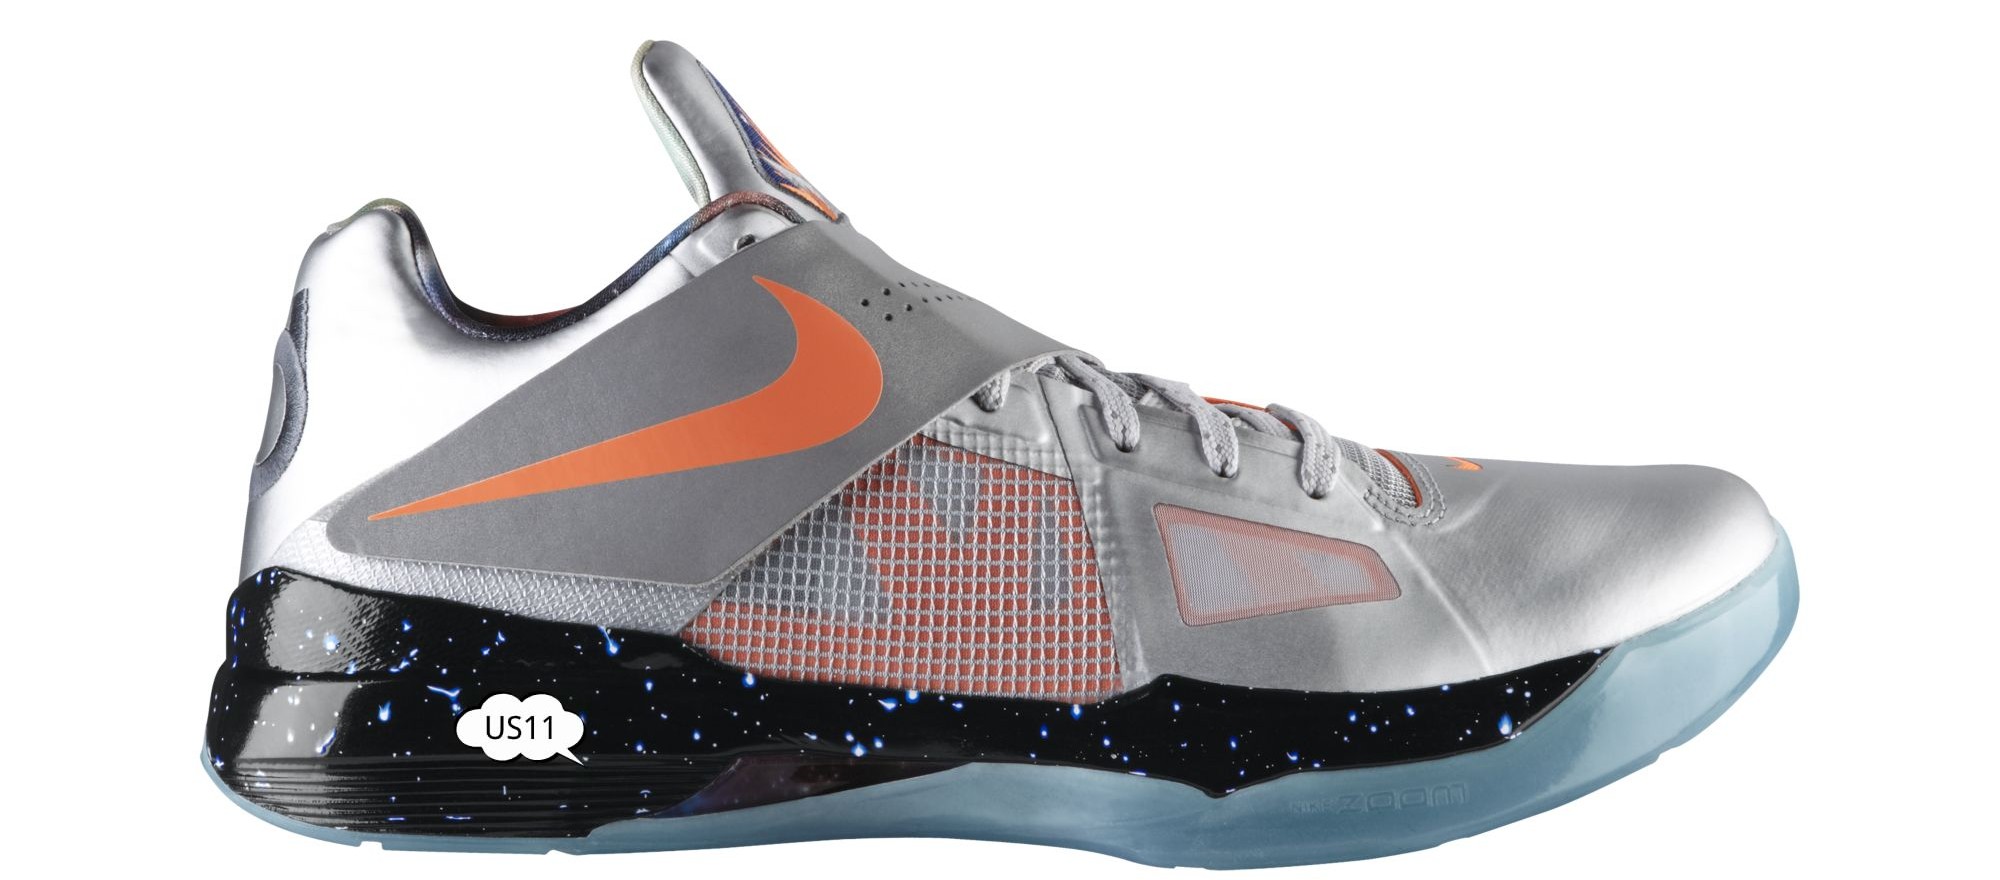 kd iv galaxy Kevin Durant shoes on sale